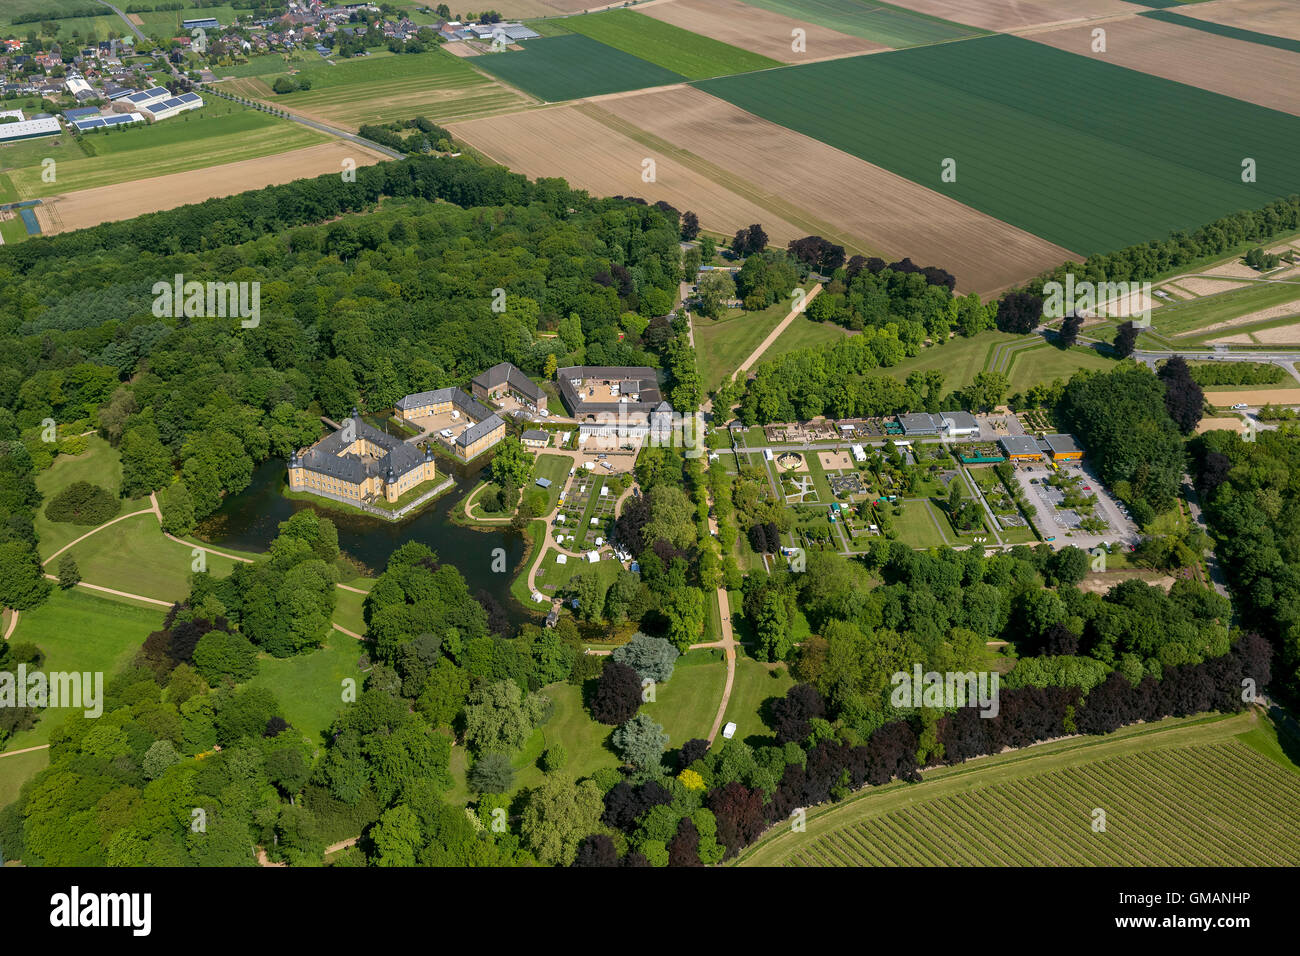 Aerial view, water castle of the city Juchen, Jüchen, Rhineland, two forecourts, parking facilities, an English landscape garden Stock Photo